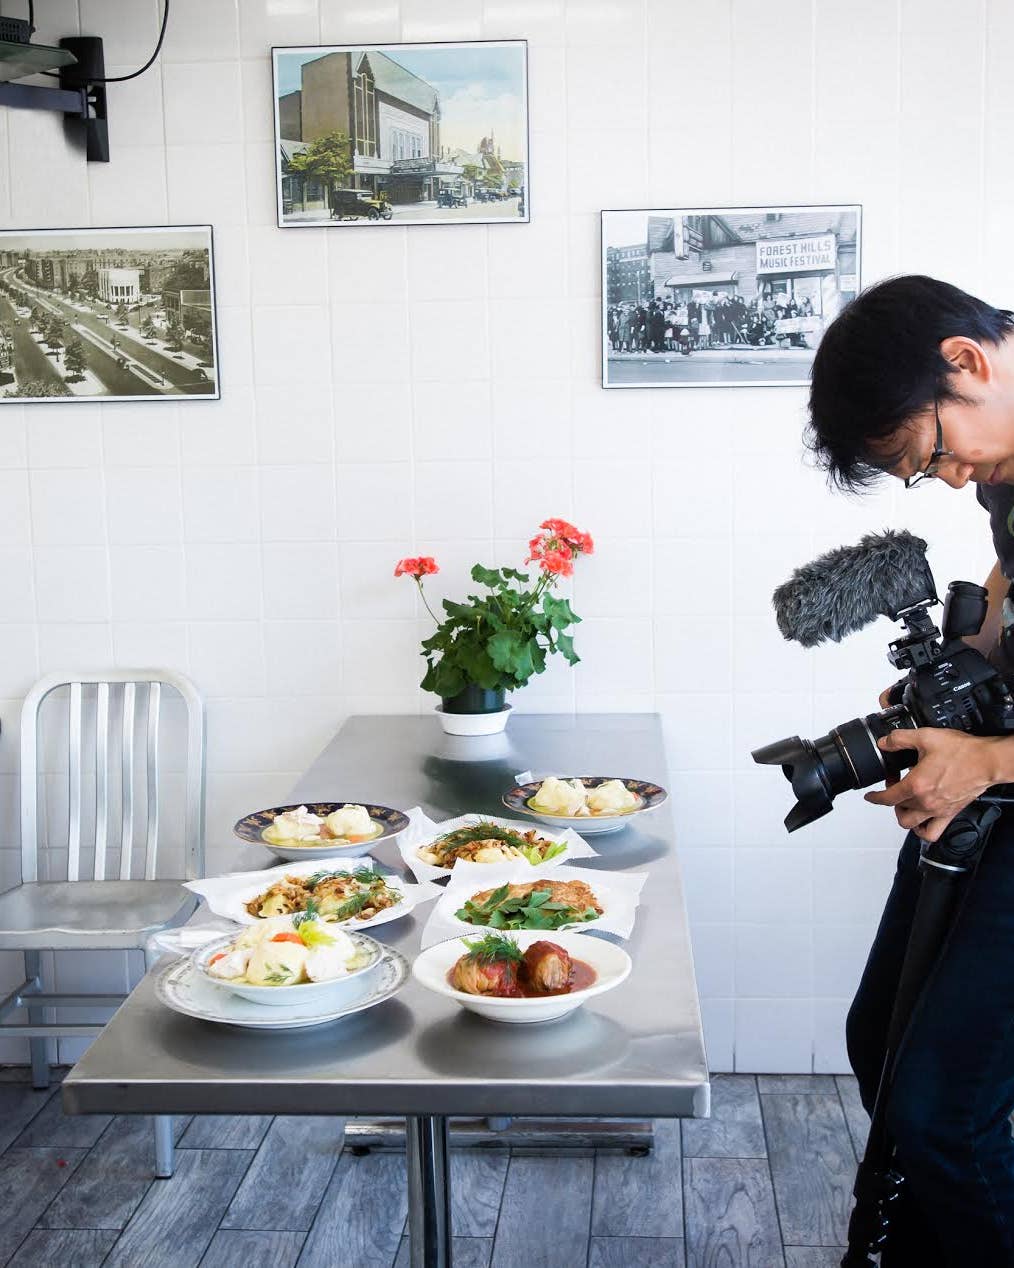 This Food Documentary Shows You the World in a New York Minute